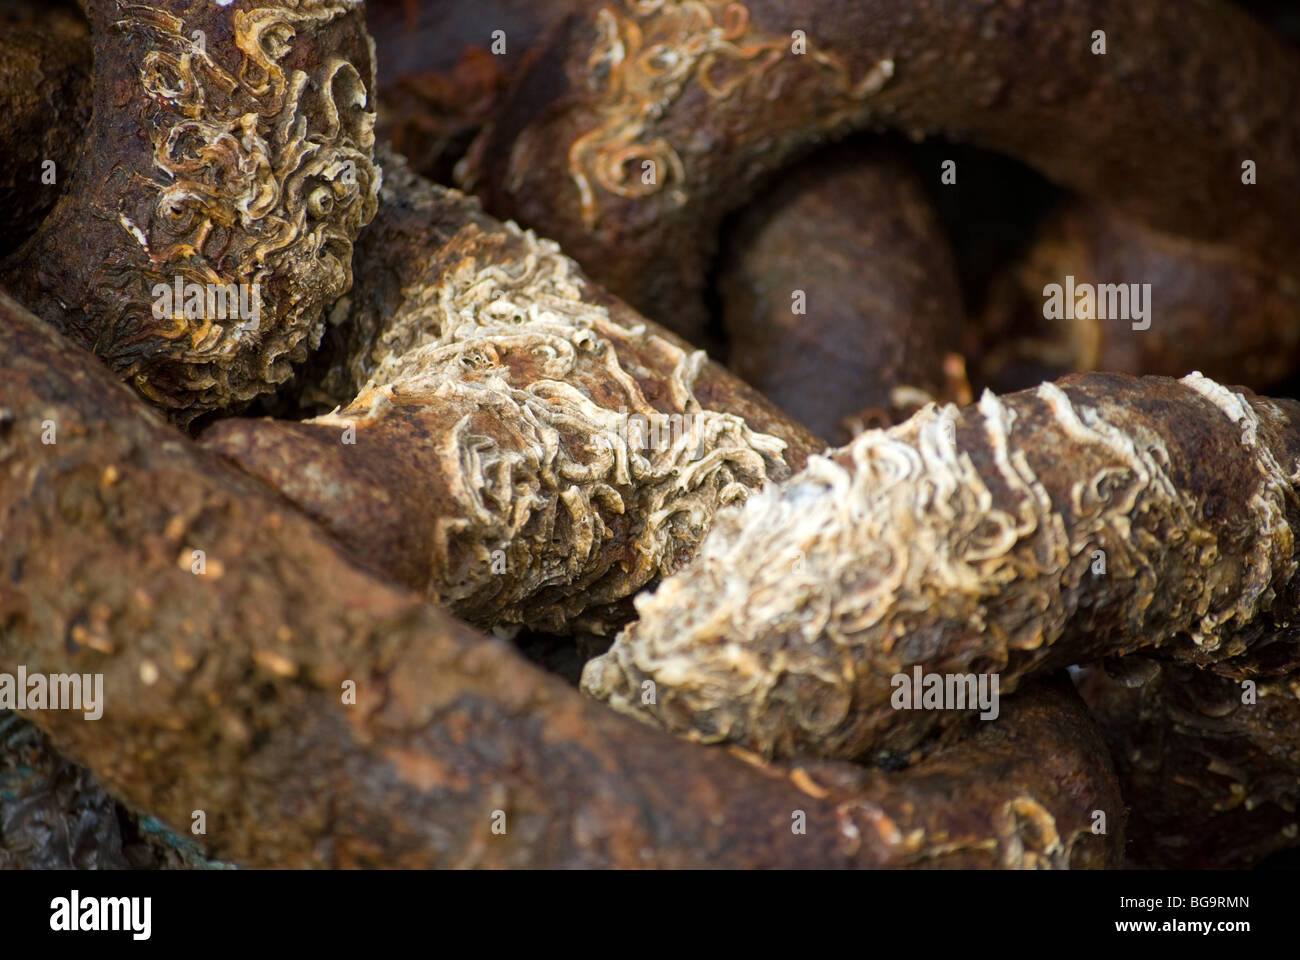 Polychaete worms on boat anchor chains Stock Photo